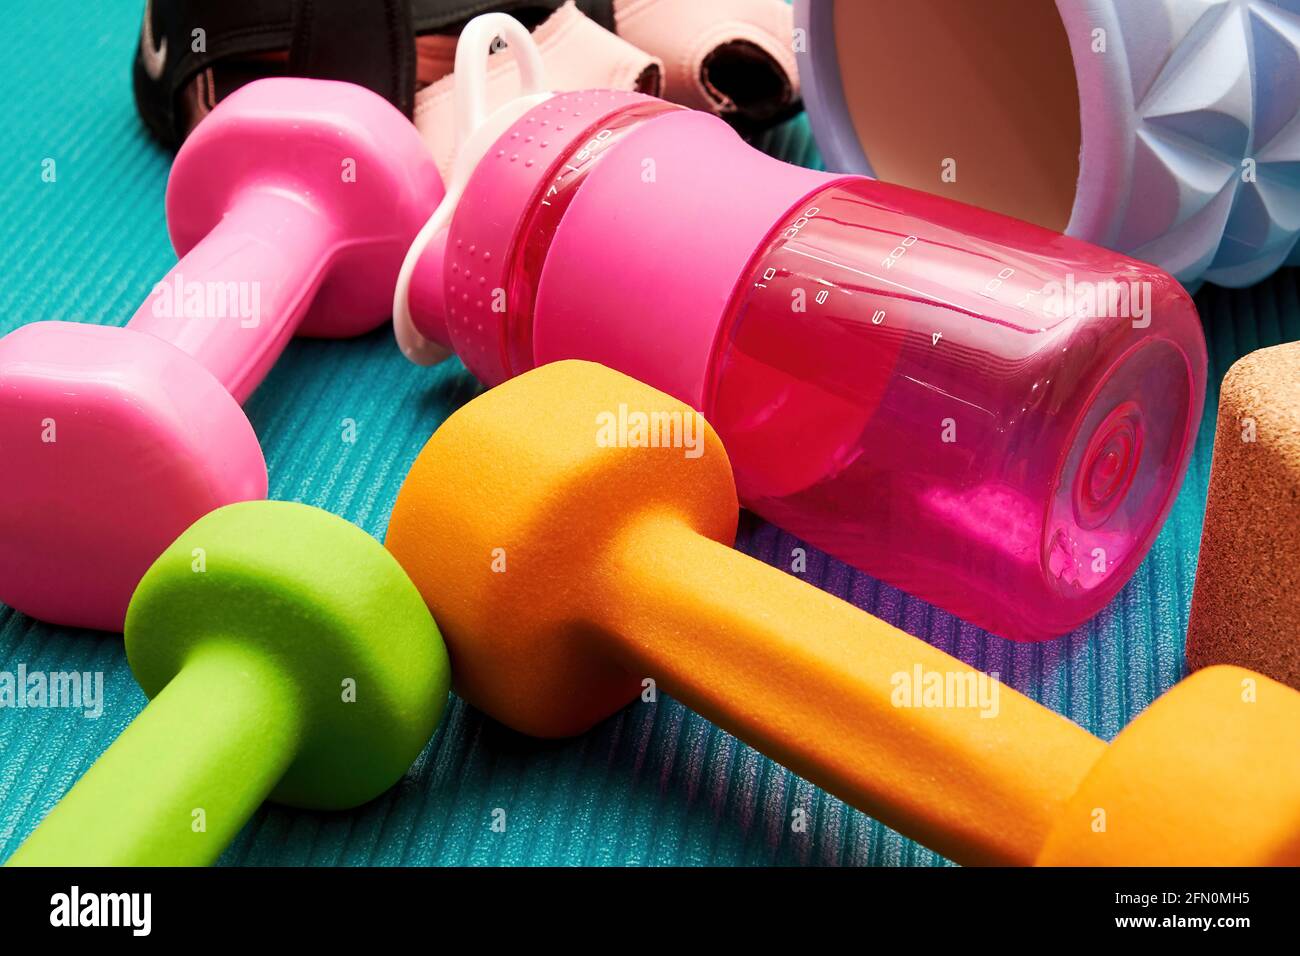 Fitness accessories, sneakers, dumbbell, roller, bottle, sports brick on the mat. Gym equipments and healthy lifestyle backgrounds Stock Photo